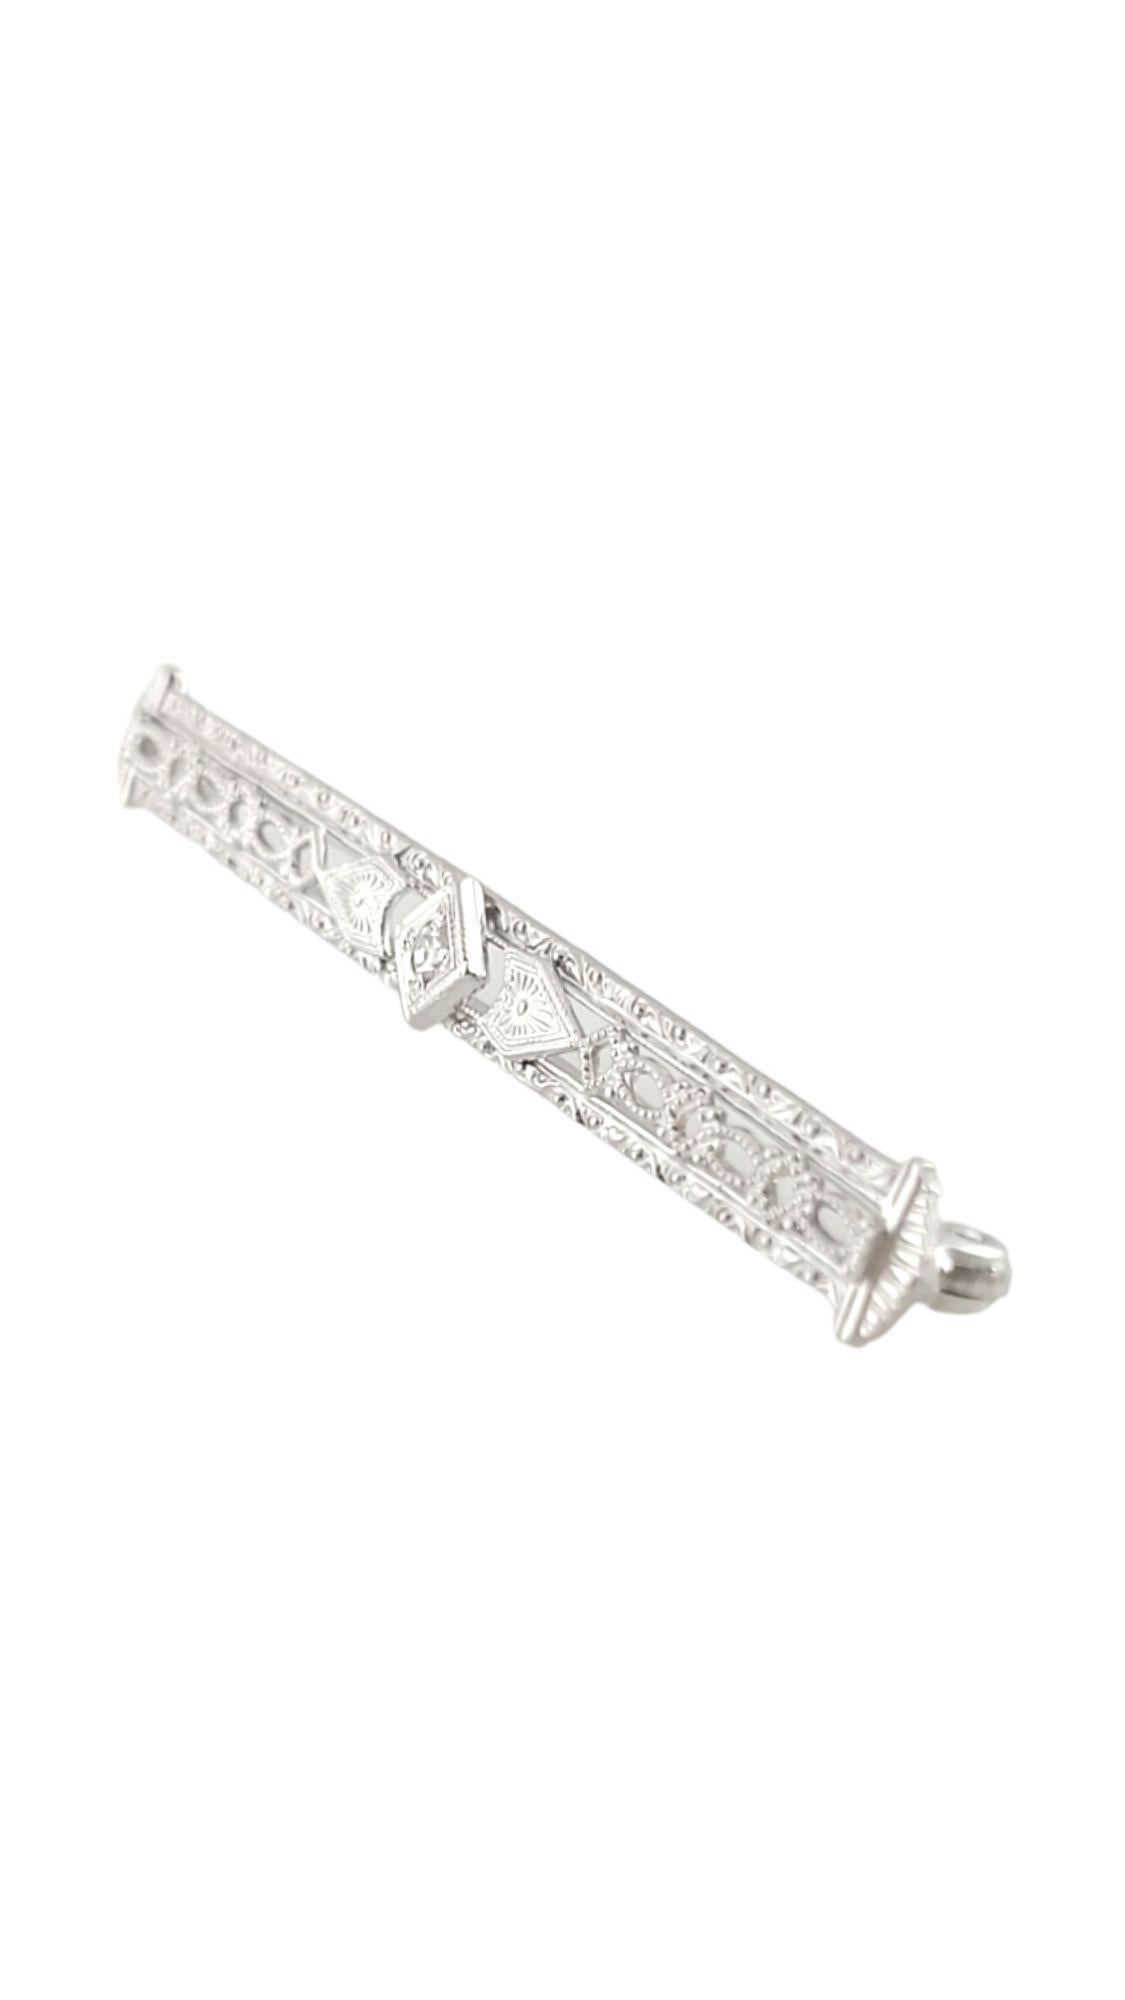 This elegant bar pin features one round single cut diamond set in beautifully detailed 14K white gold filigree. Width: 5 mm

Approximate total diamond weight: .03 ct.

Diamond color: H

Diamond clarity: I1

Size: 2 inches

Weight:  2.8 gr./  1.8